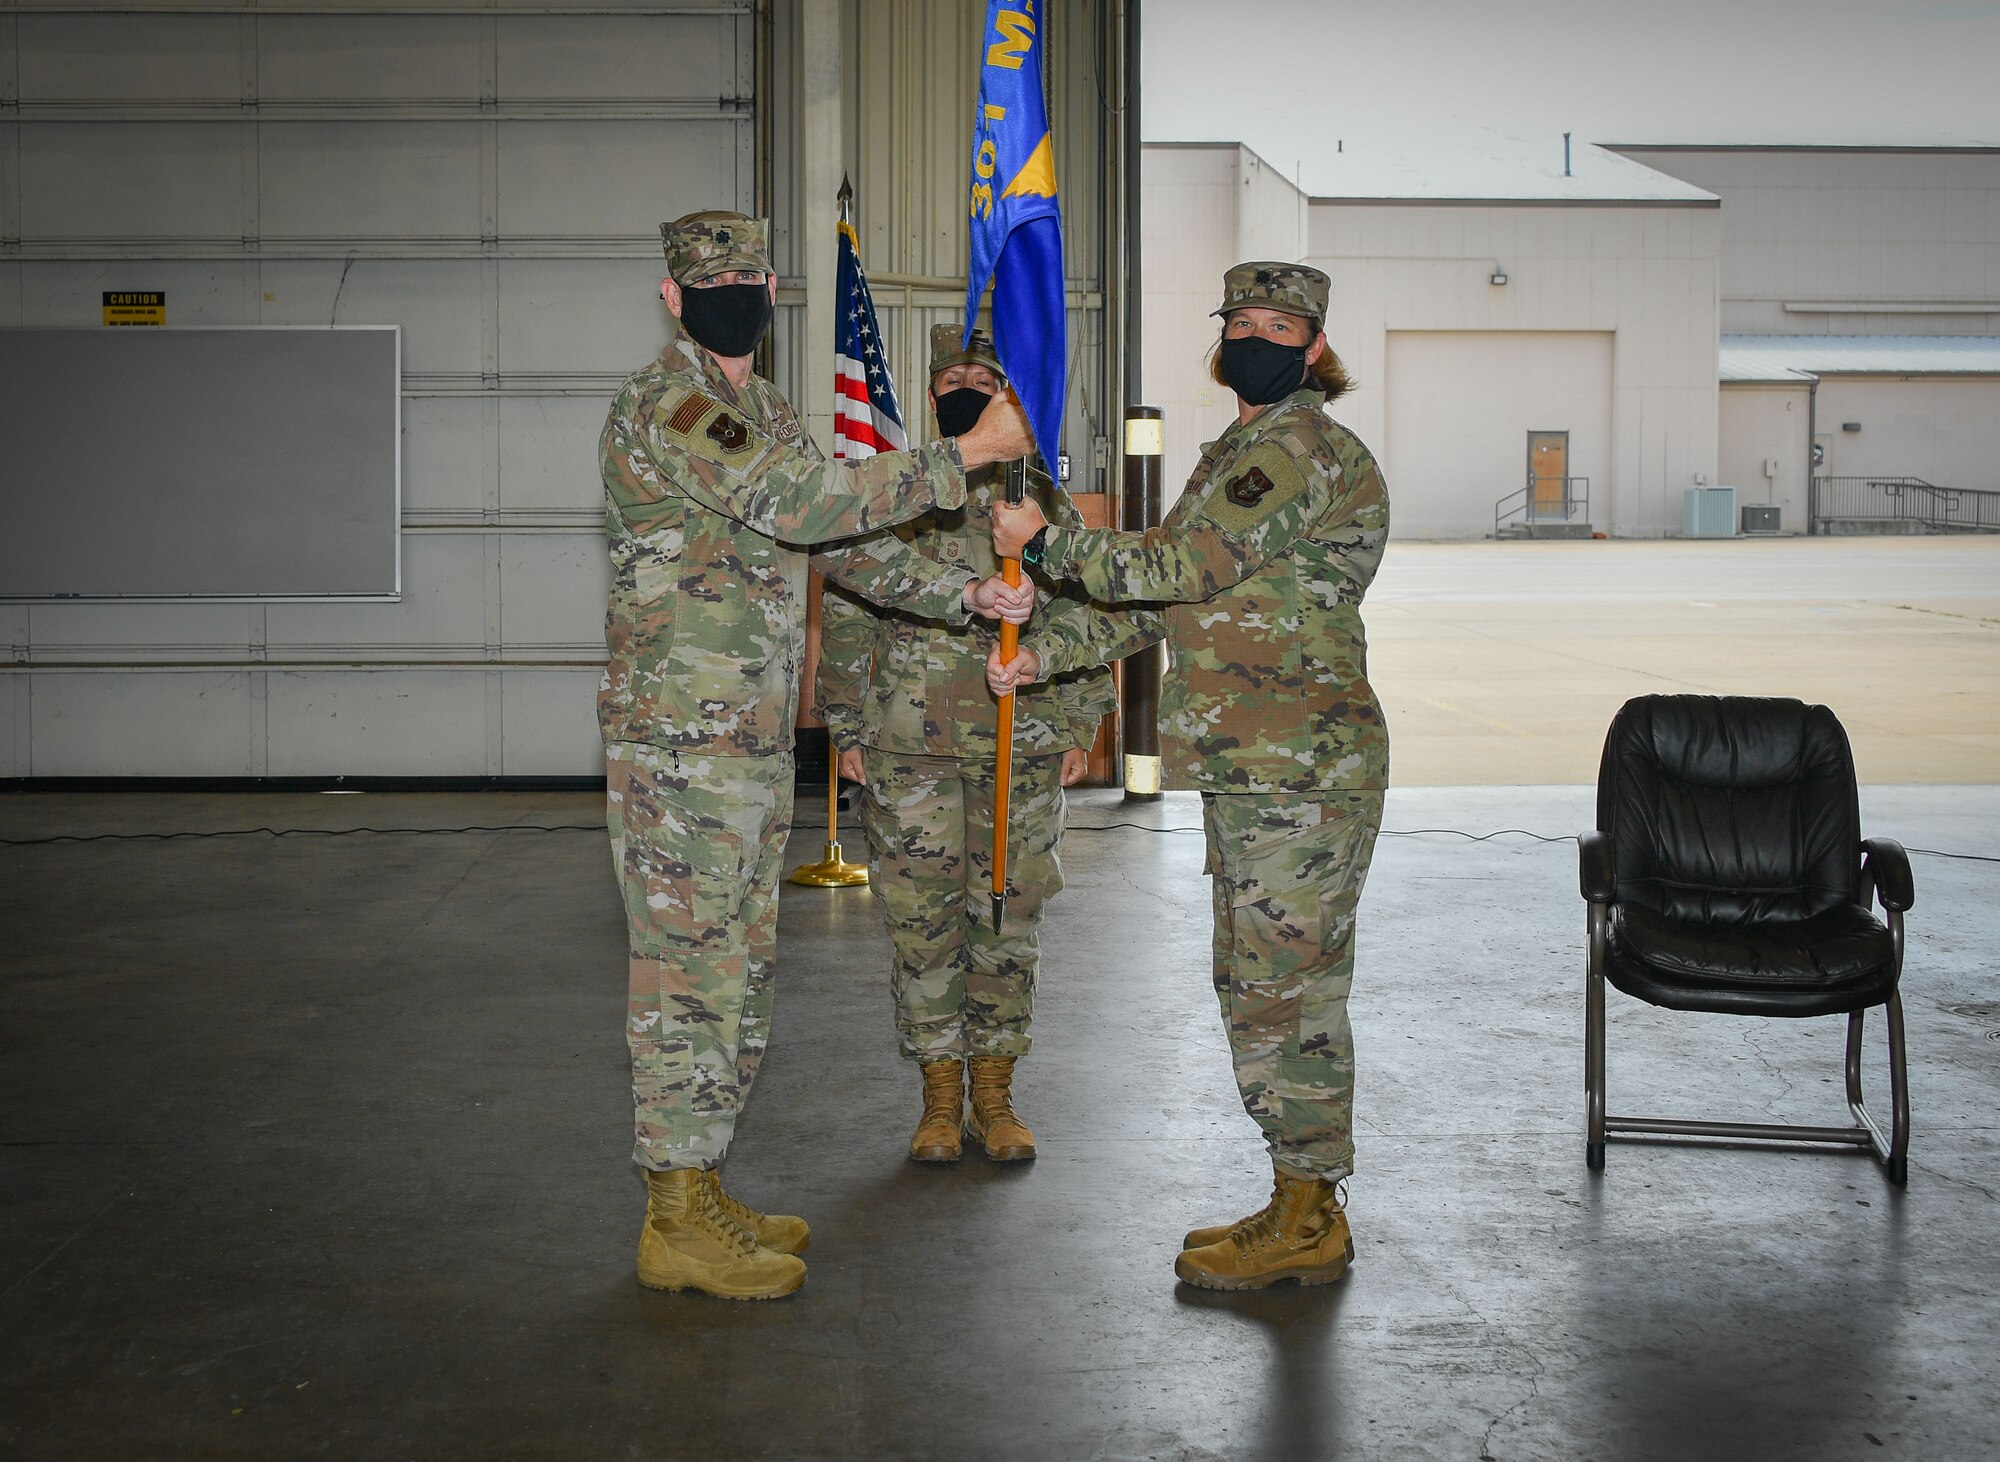 (Left to right) Lt. Col. Jeremy Moore, 301st Mission Support Group, deputy commander, hands the 301 FW LRS guidon to Lt. Col. Farrah Schluter during the 301st Fighter Wing Logistics Readiness Squadron Assumption of Command, September 13, 2020, at U.S. Naval Air Station Joint Reserve Base Fort Worth, Texas. The ceremony was limited to in-person personnel but also shared live on social media due to CDC protections. (U.S. Air Force photo by Staff Sgt. Randall Moose)